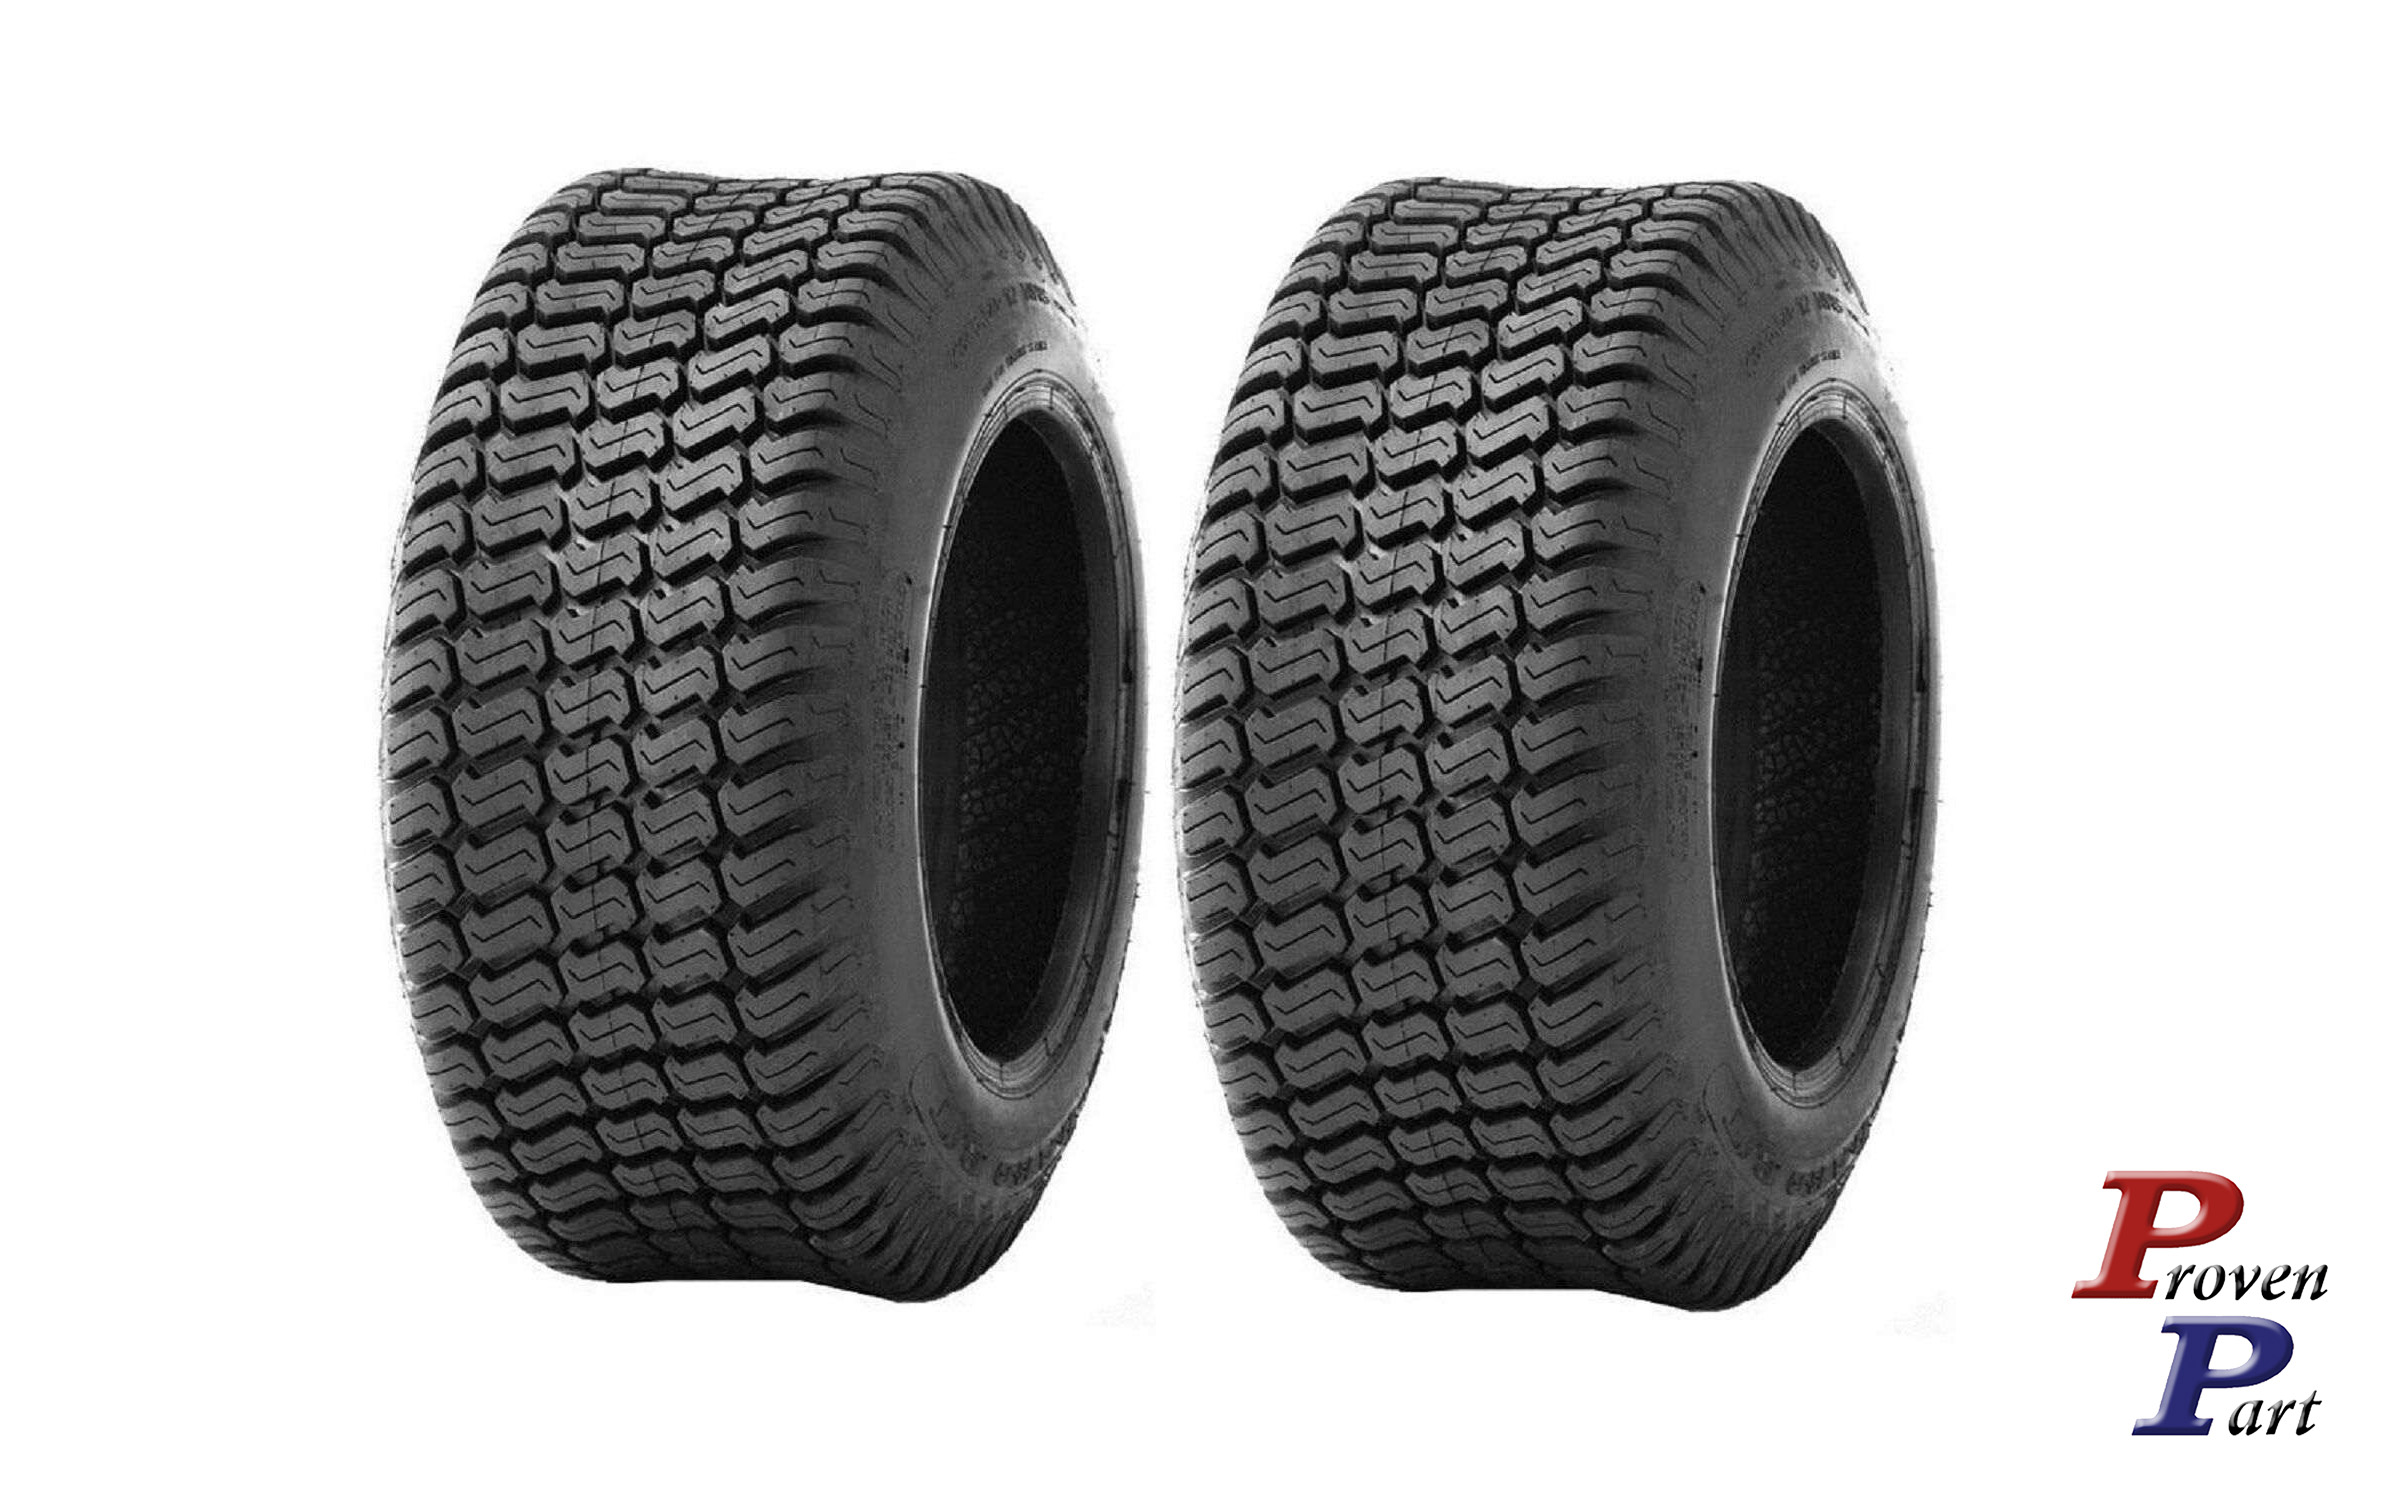 Set of 2 lawn mower tires PROMASTER 15X6.00-6 4 ply tubeless